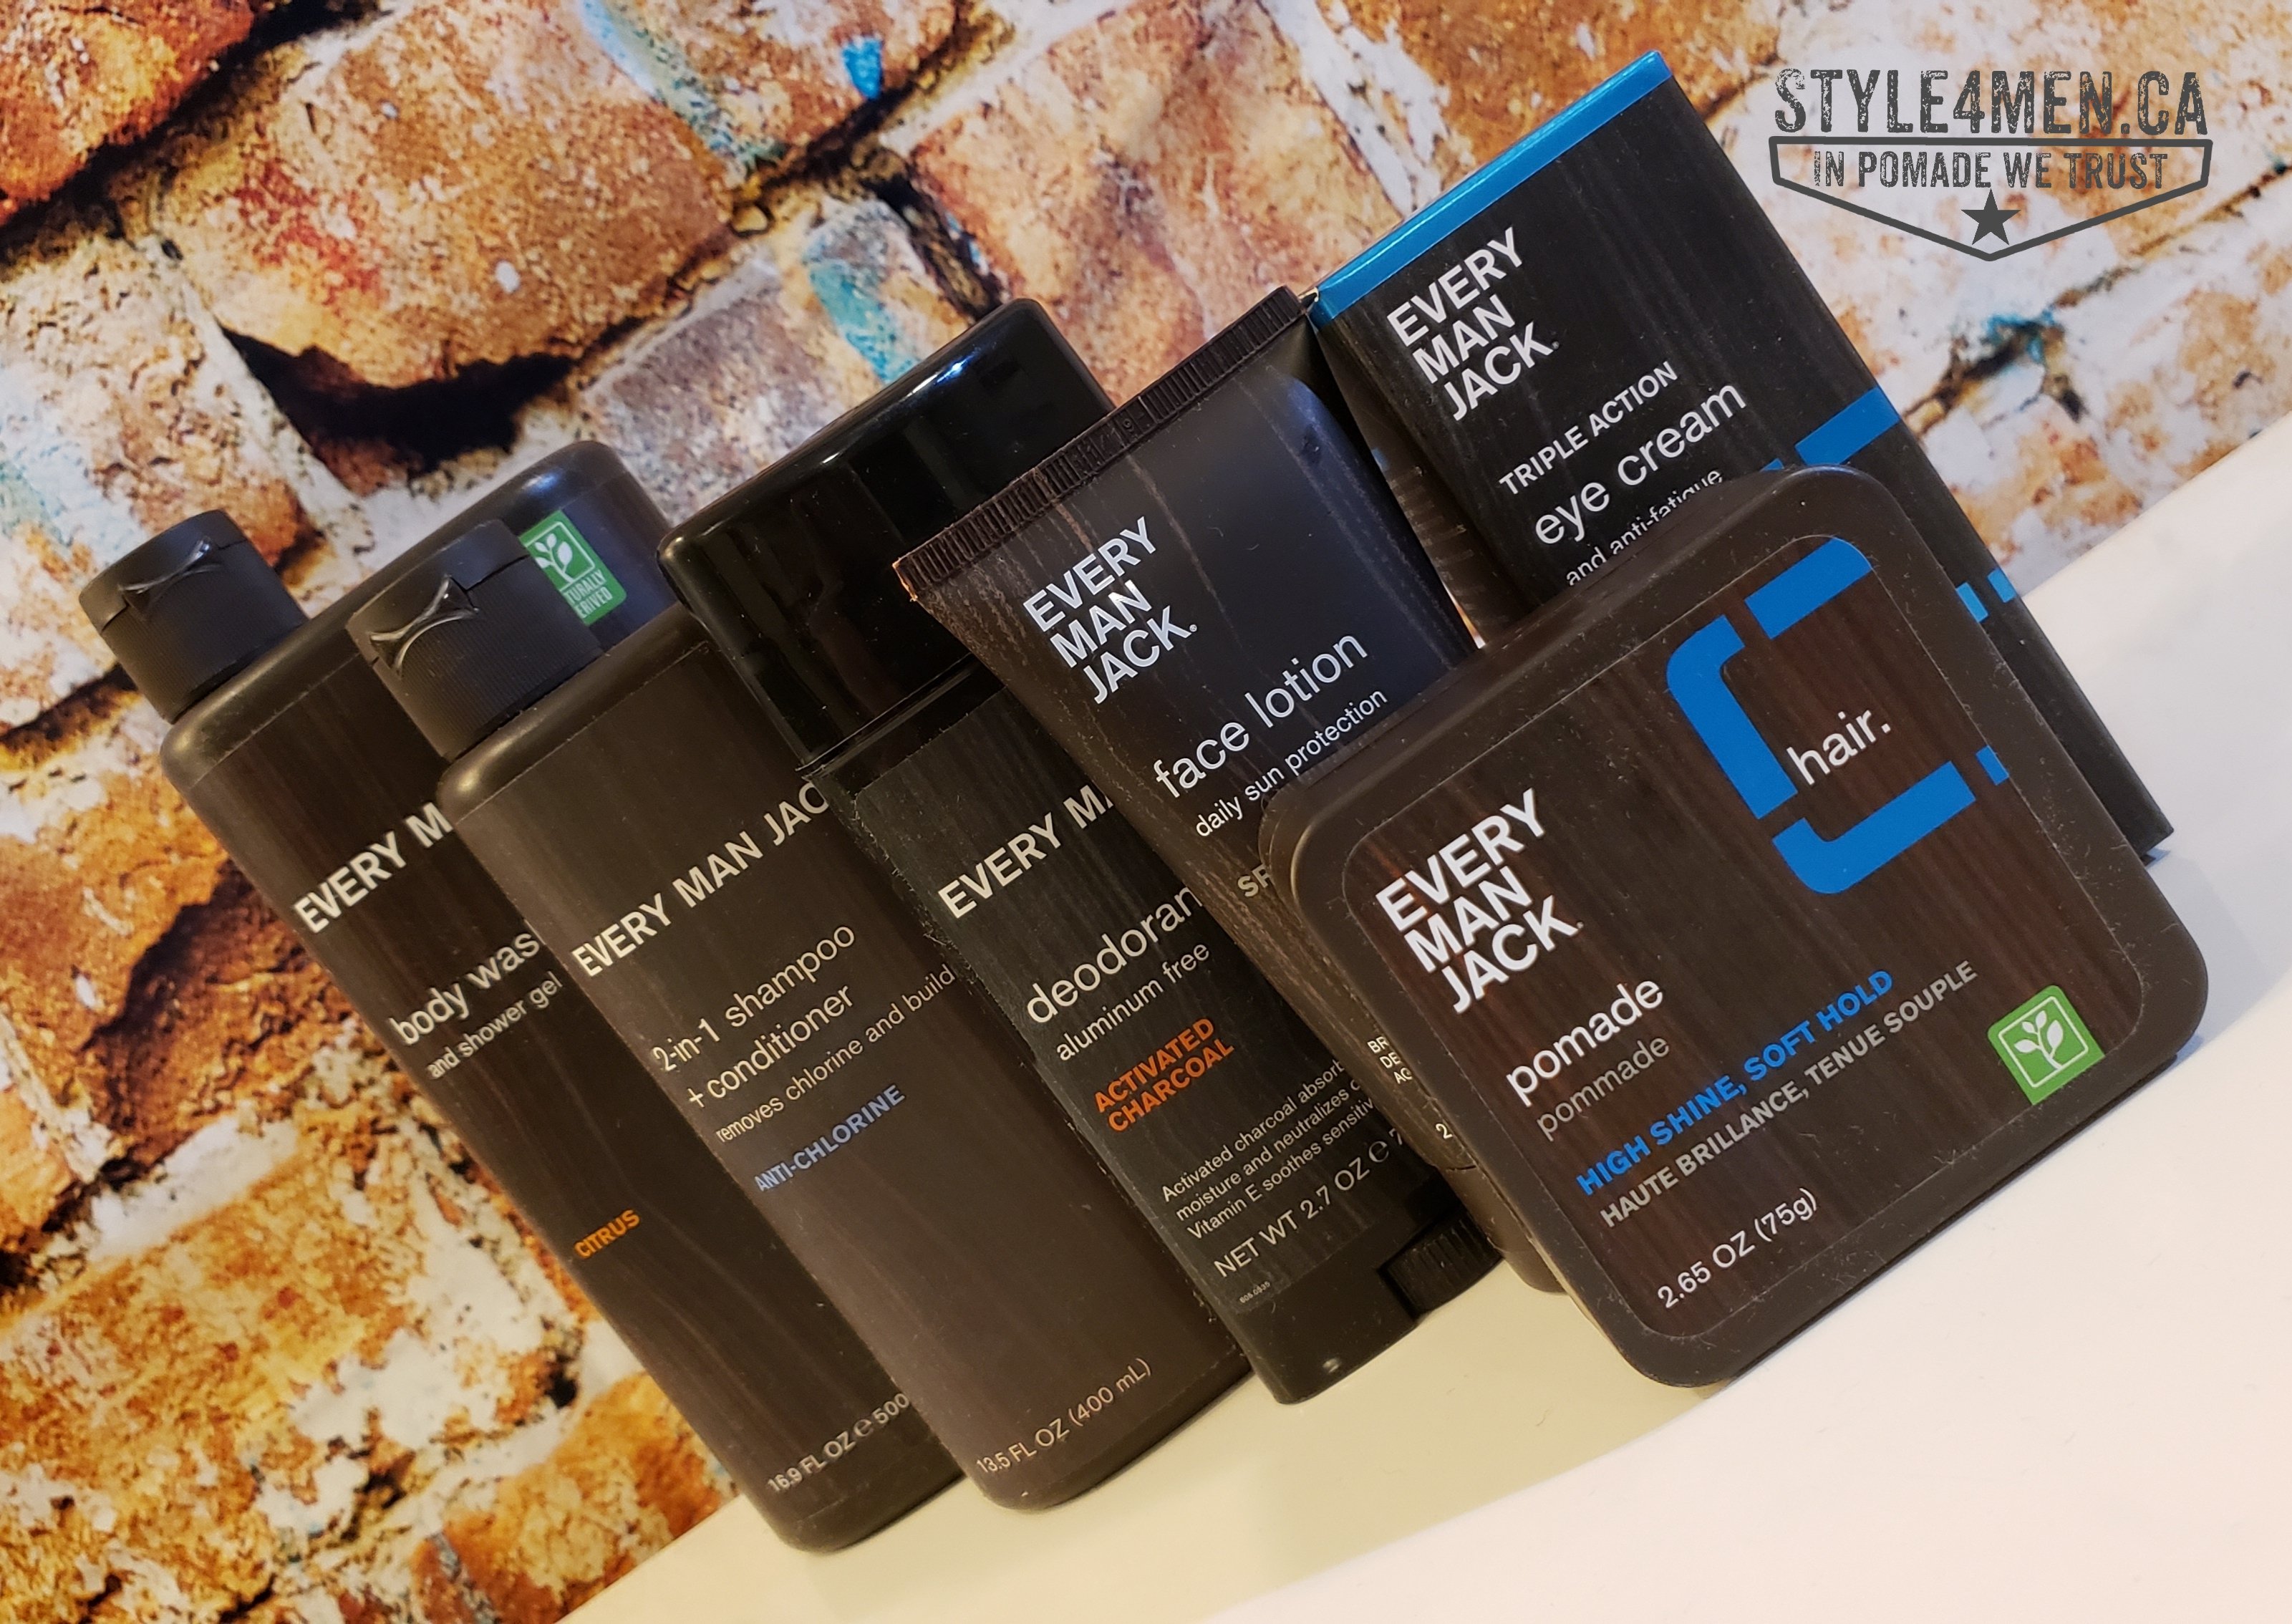 Every Man Jack Essentials – unboxed